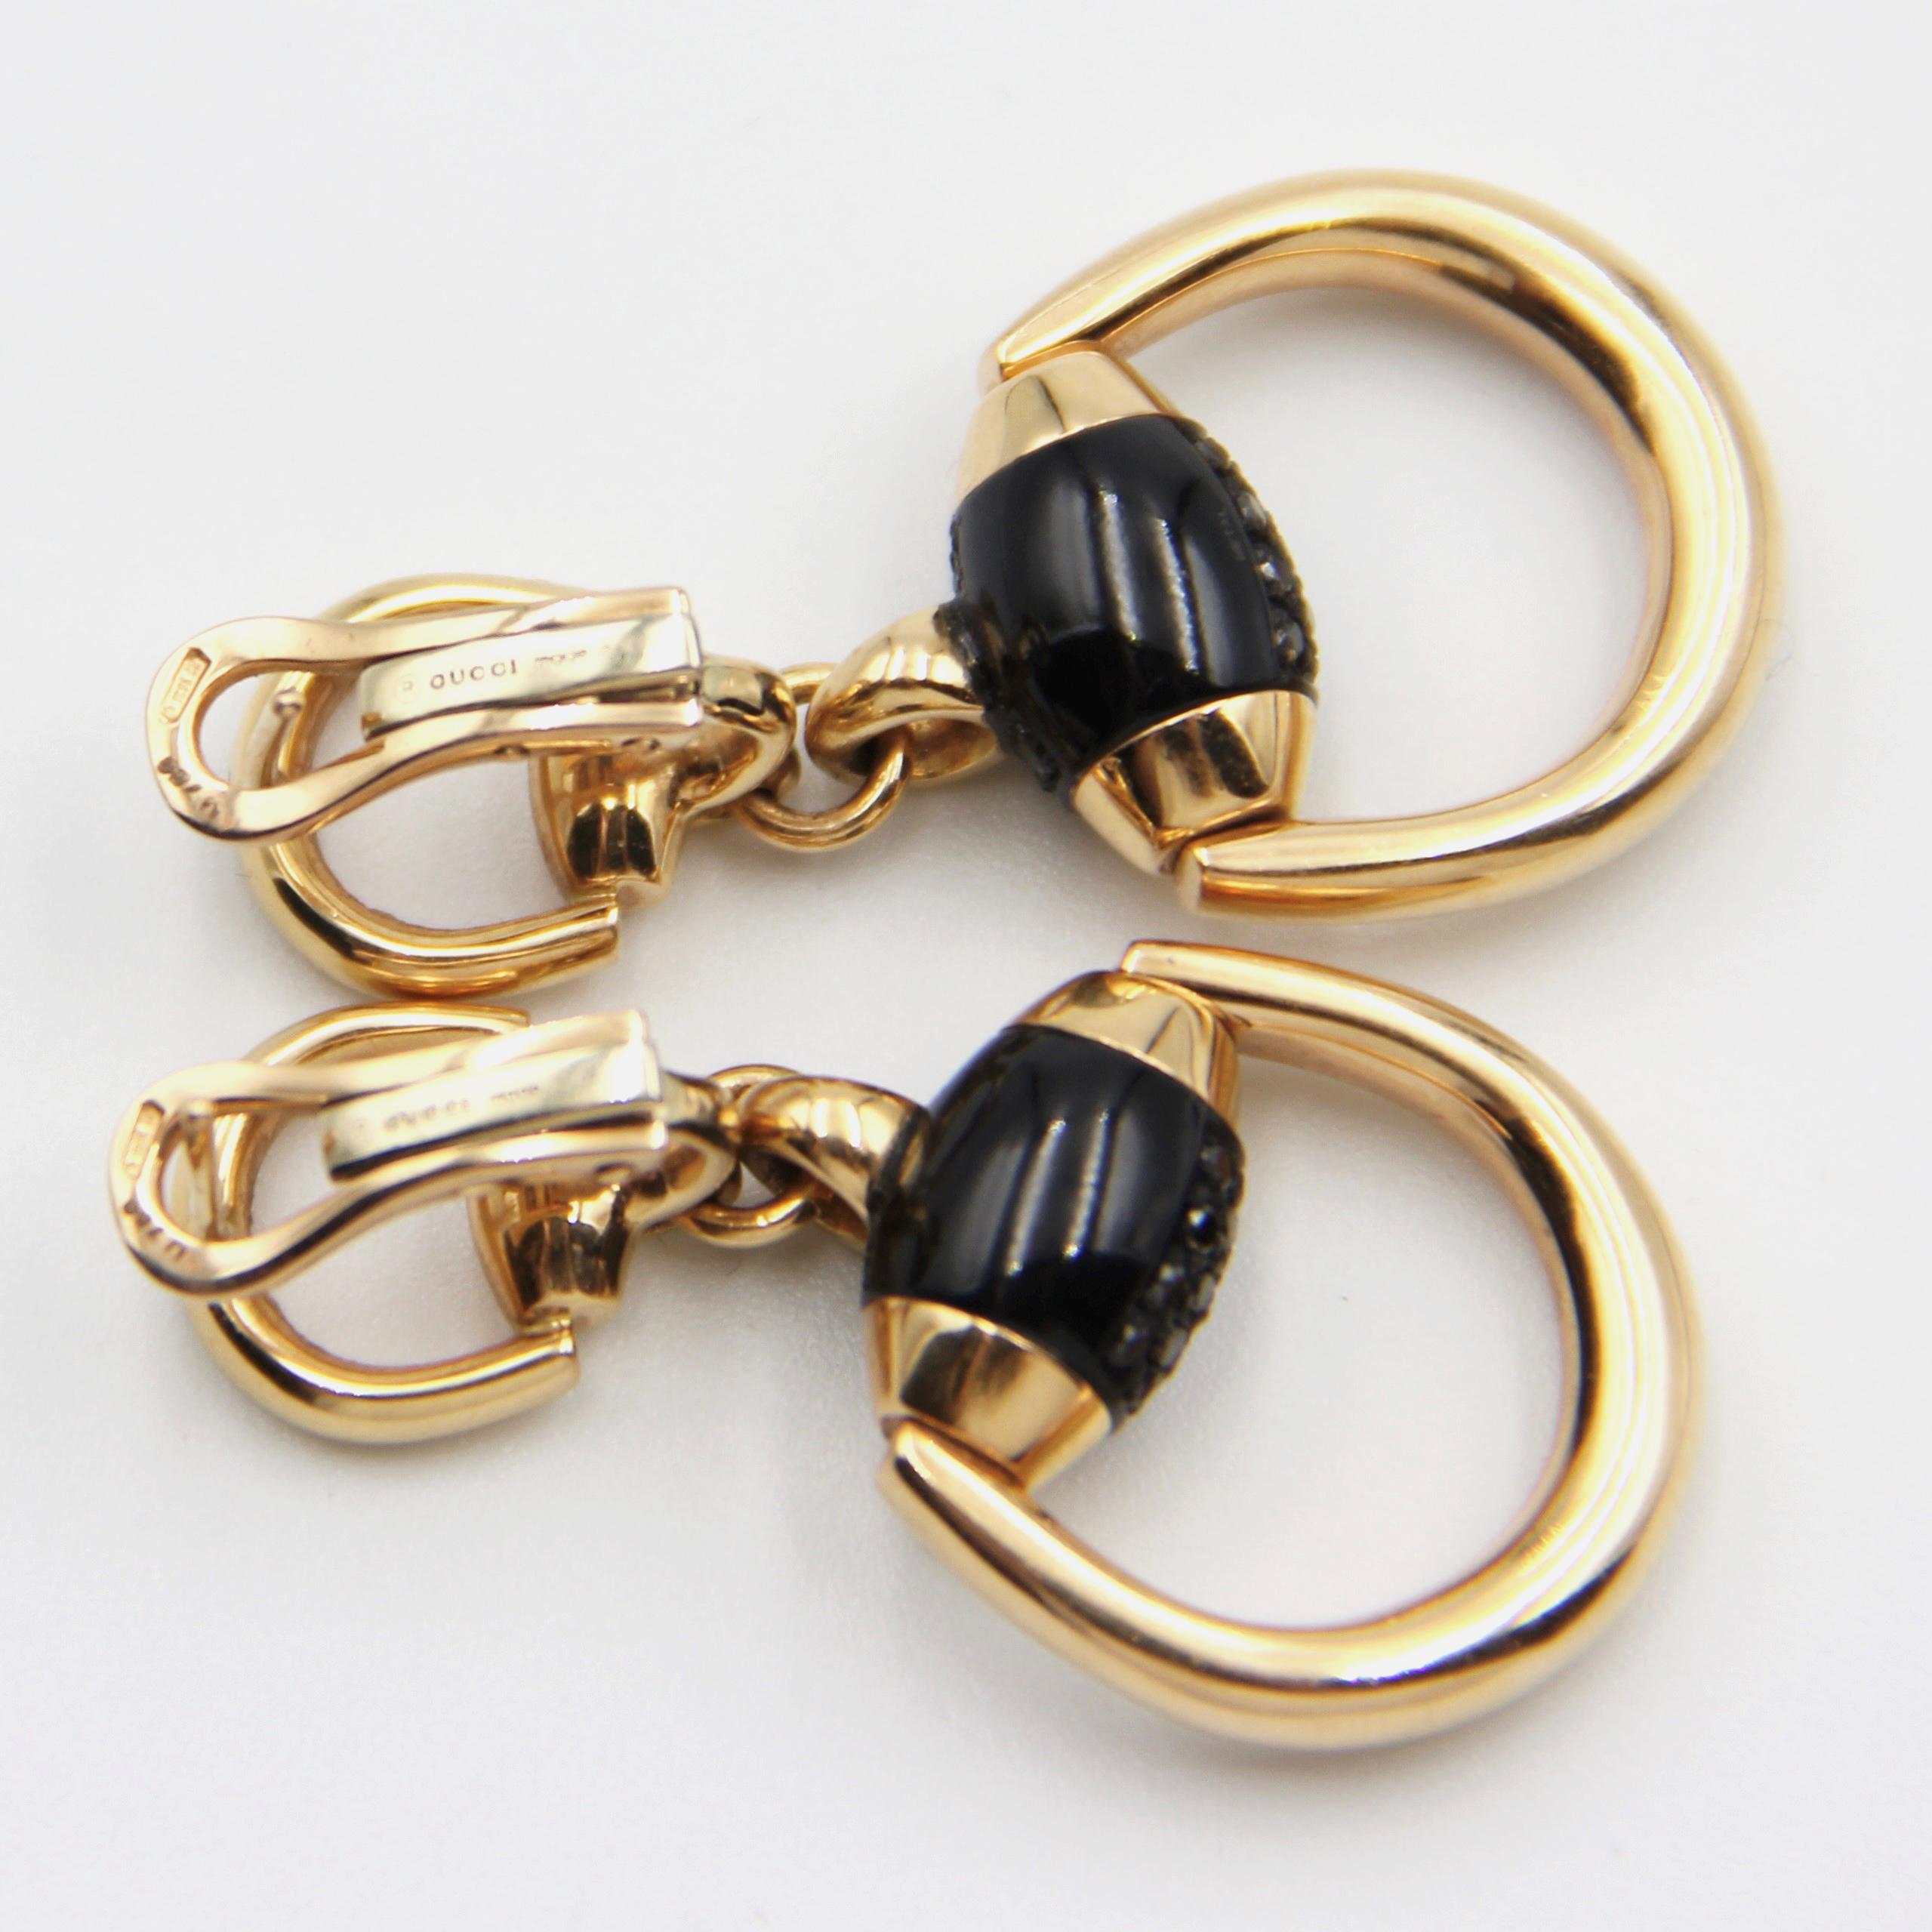 Gucci 18k Gold Black Diamond Horsebit Earrings In Excellent Condition For Sale In Istanbul, TR